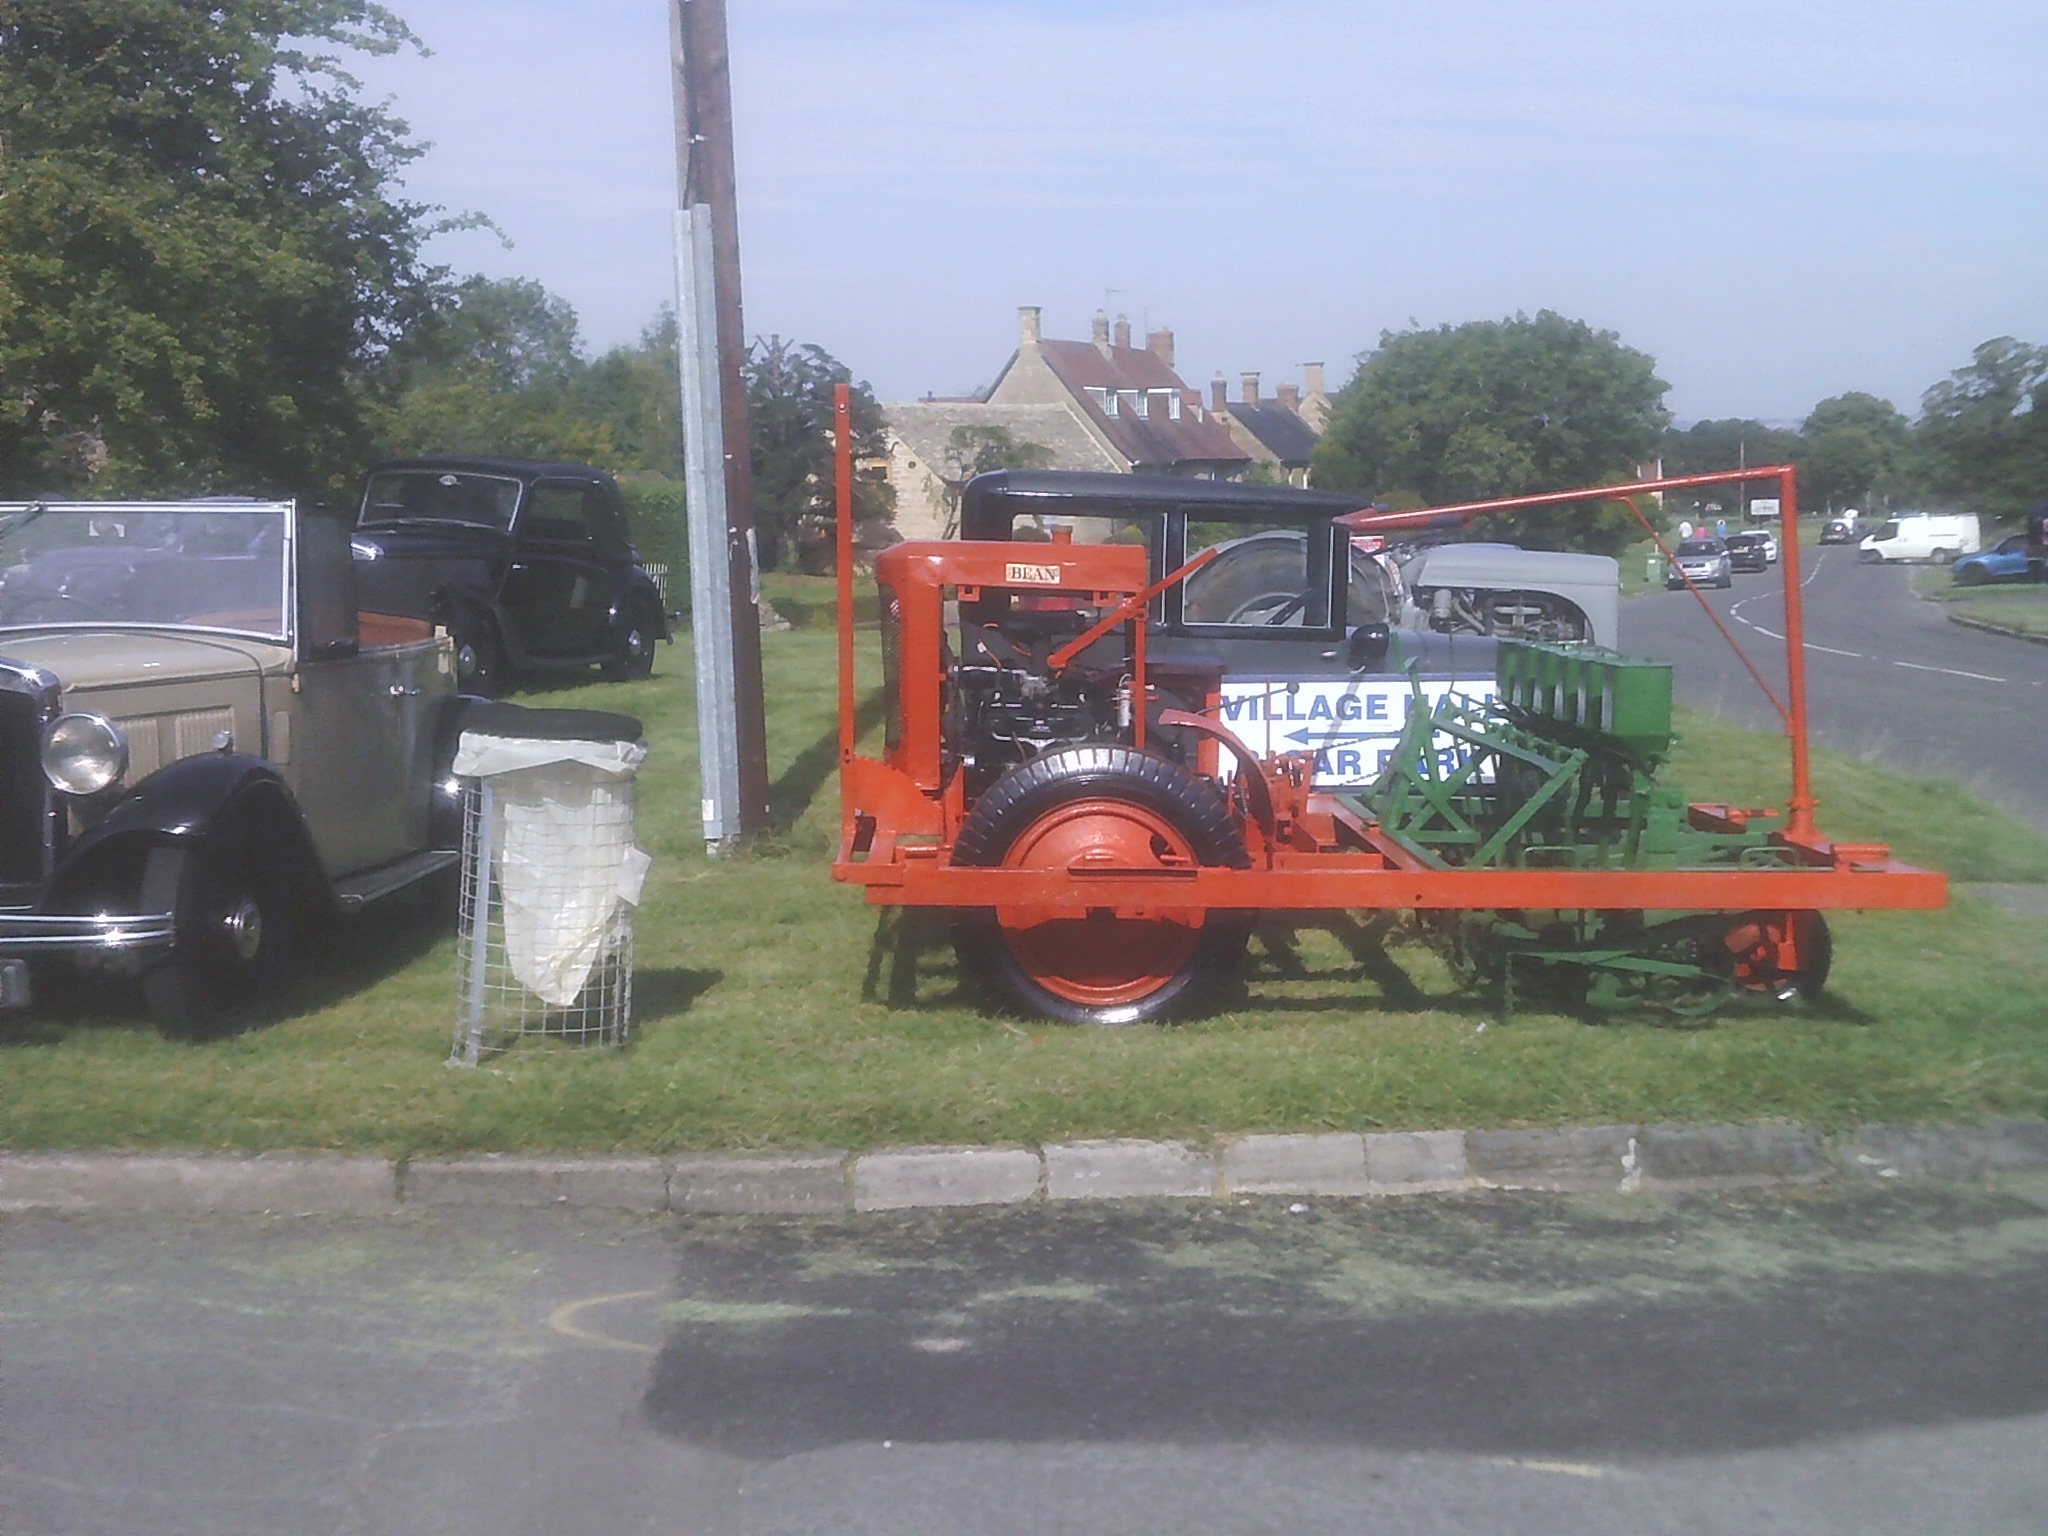 Vintage seed drill at the Willersey Show